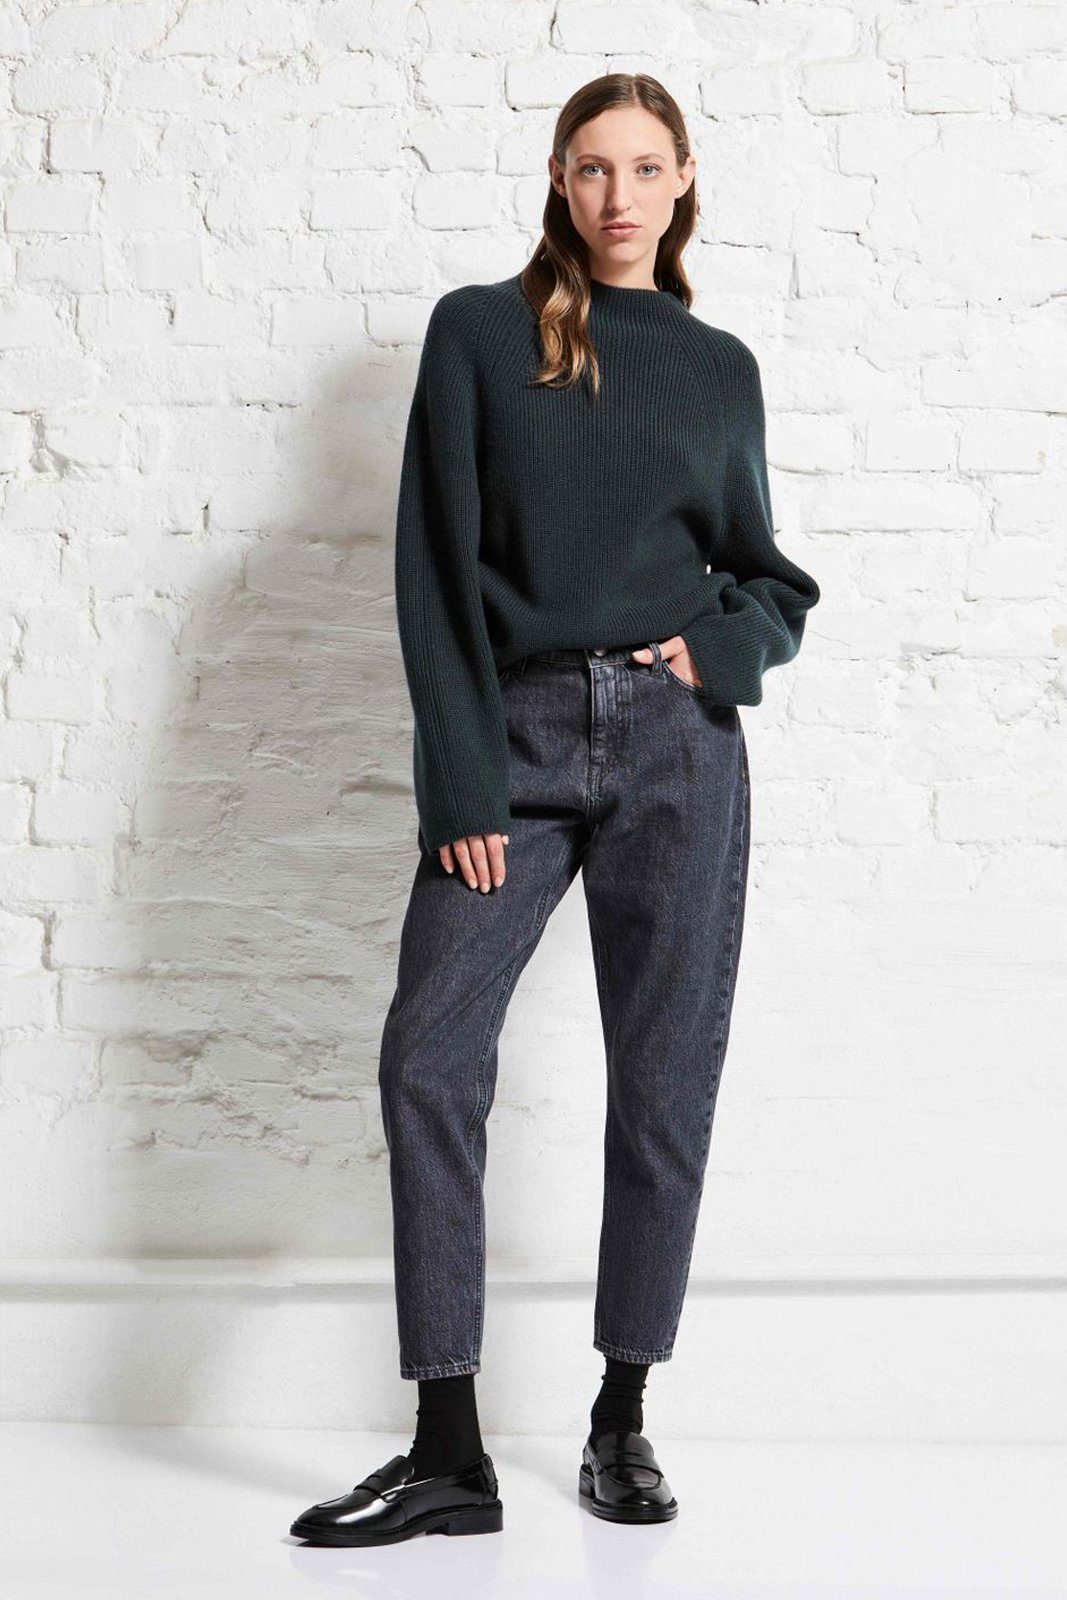 wunderwerk Mom-Jeans Collien black bleached carrot eco 250 cropped